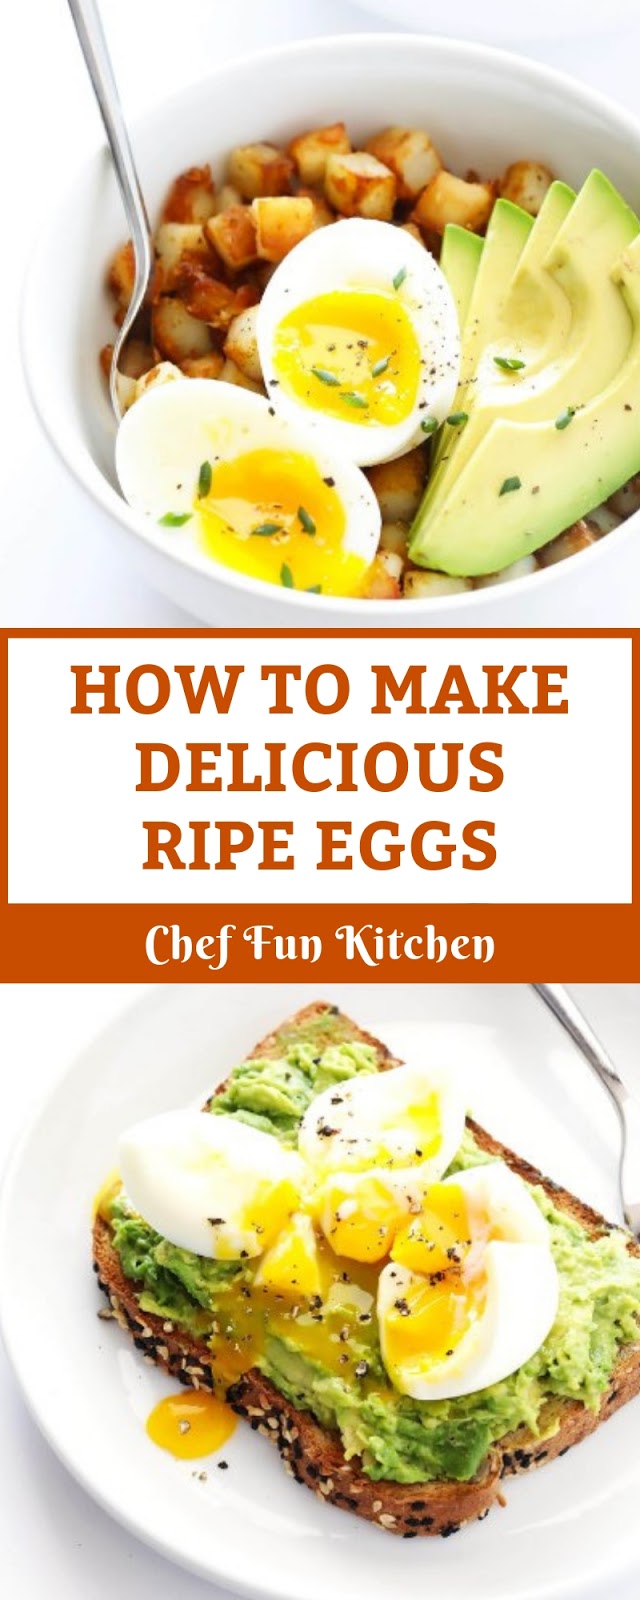 HOW TO MAKE DELICIOUS RIPE EGGS